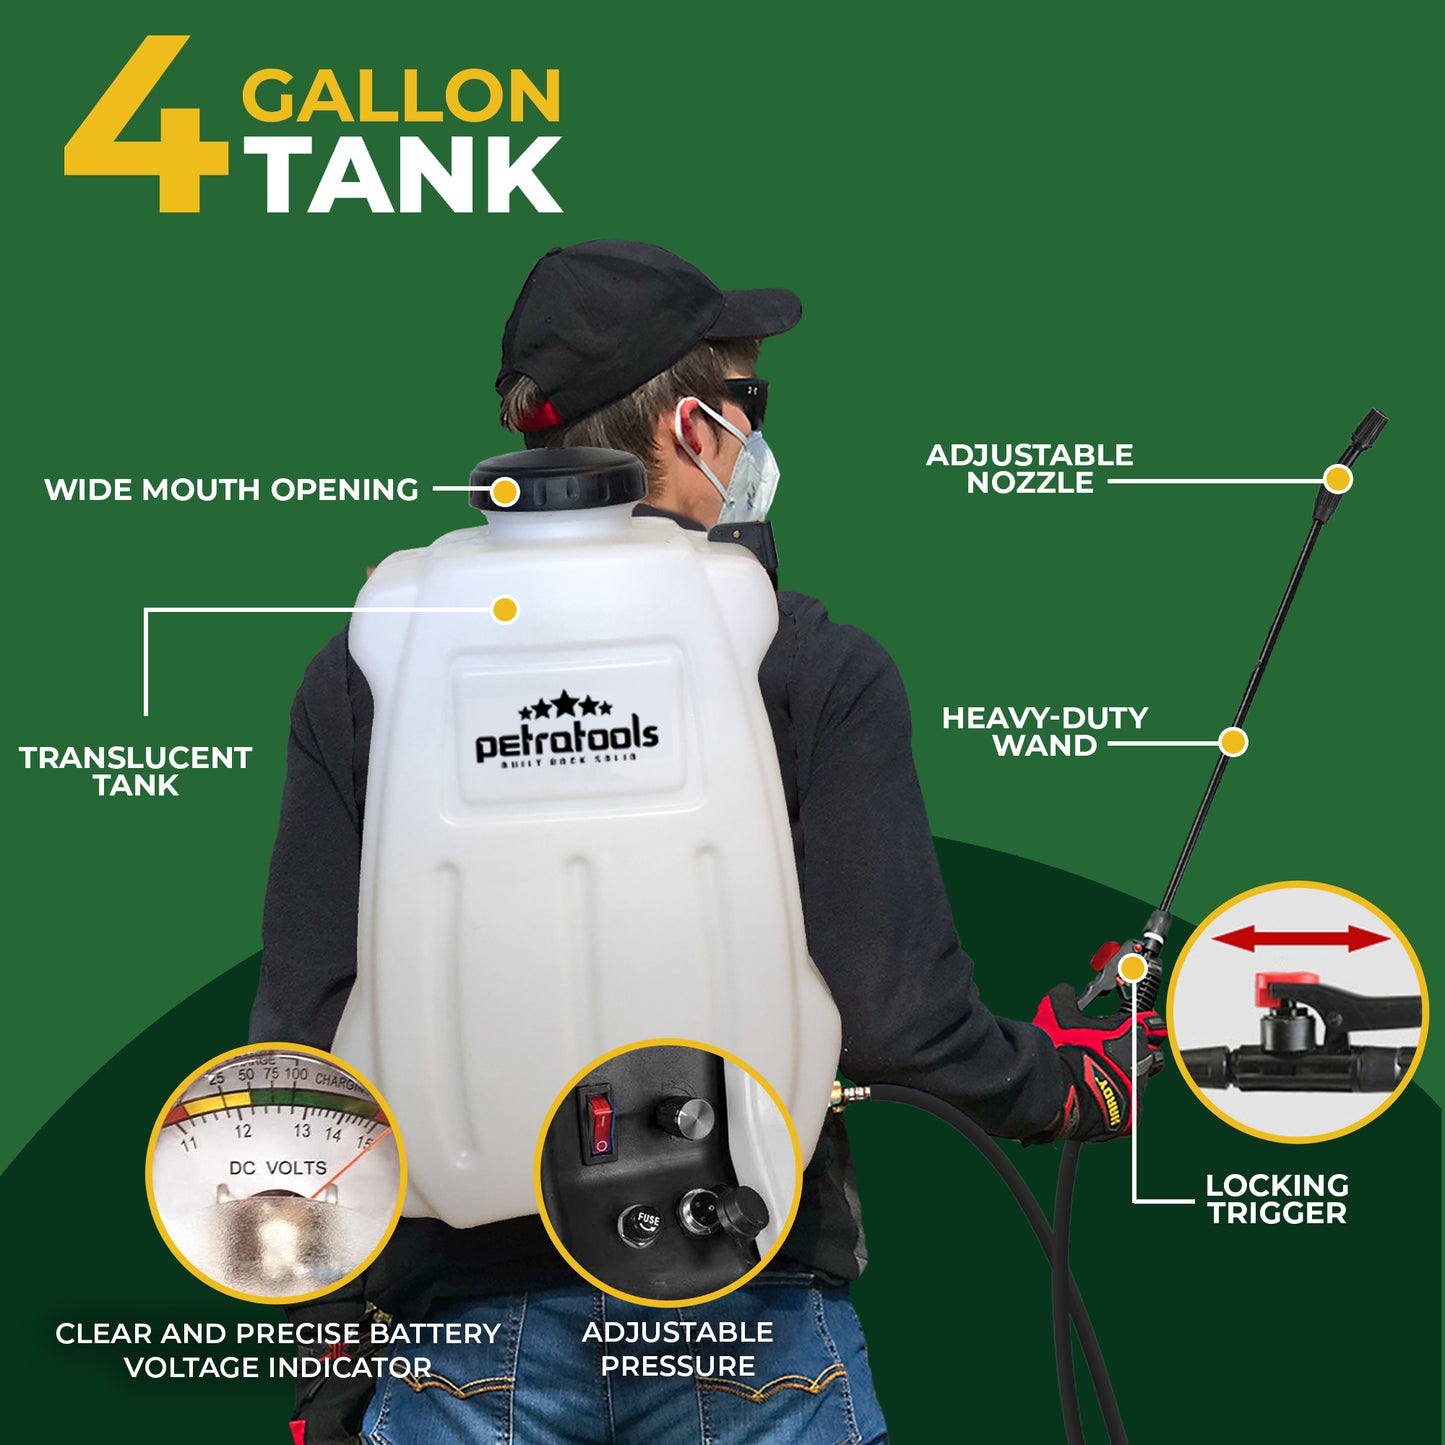 HD4100 Battery Operated Backpack Sprayer - 4 Gallons